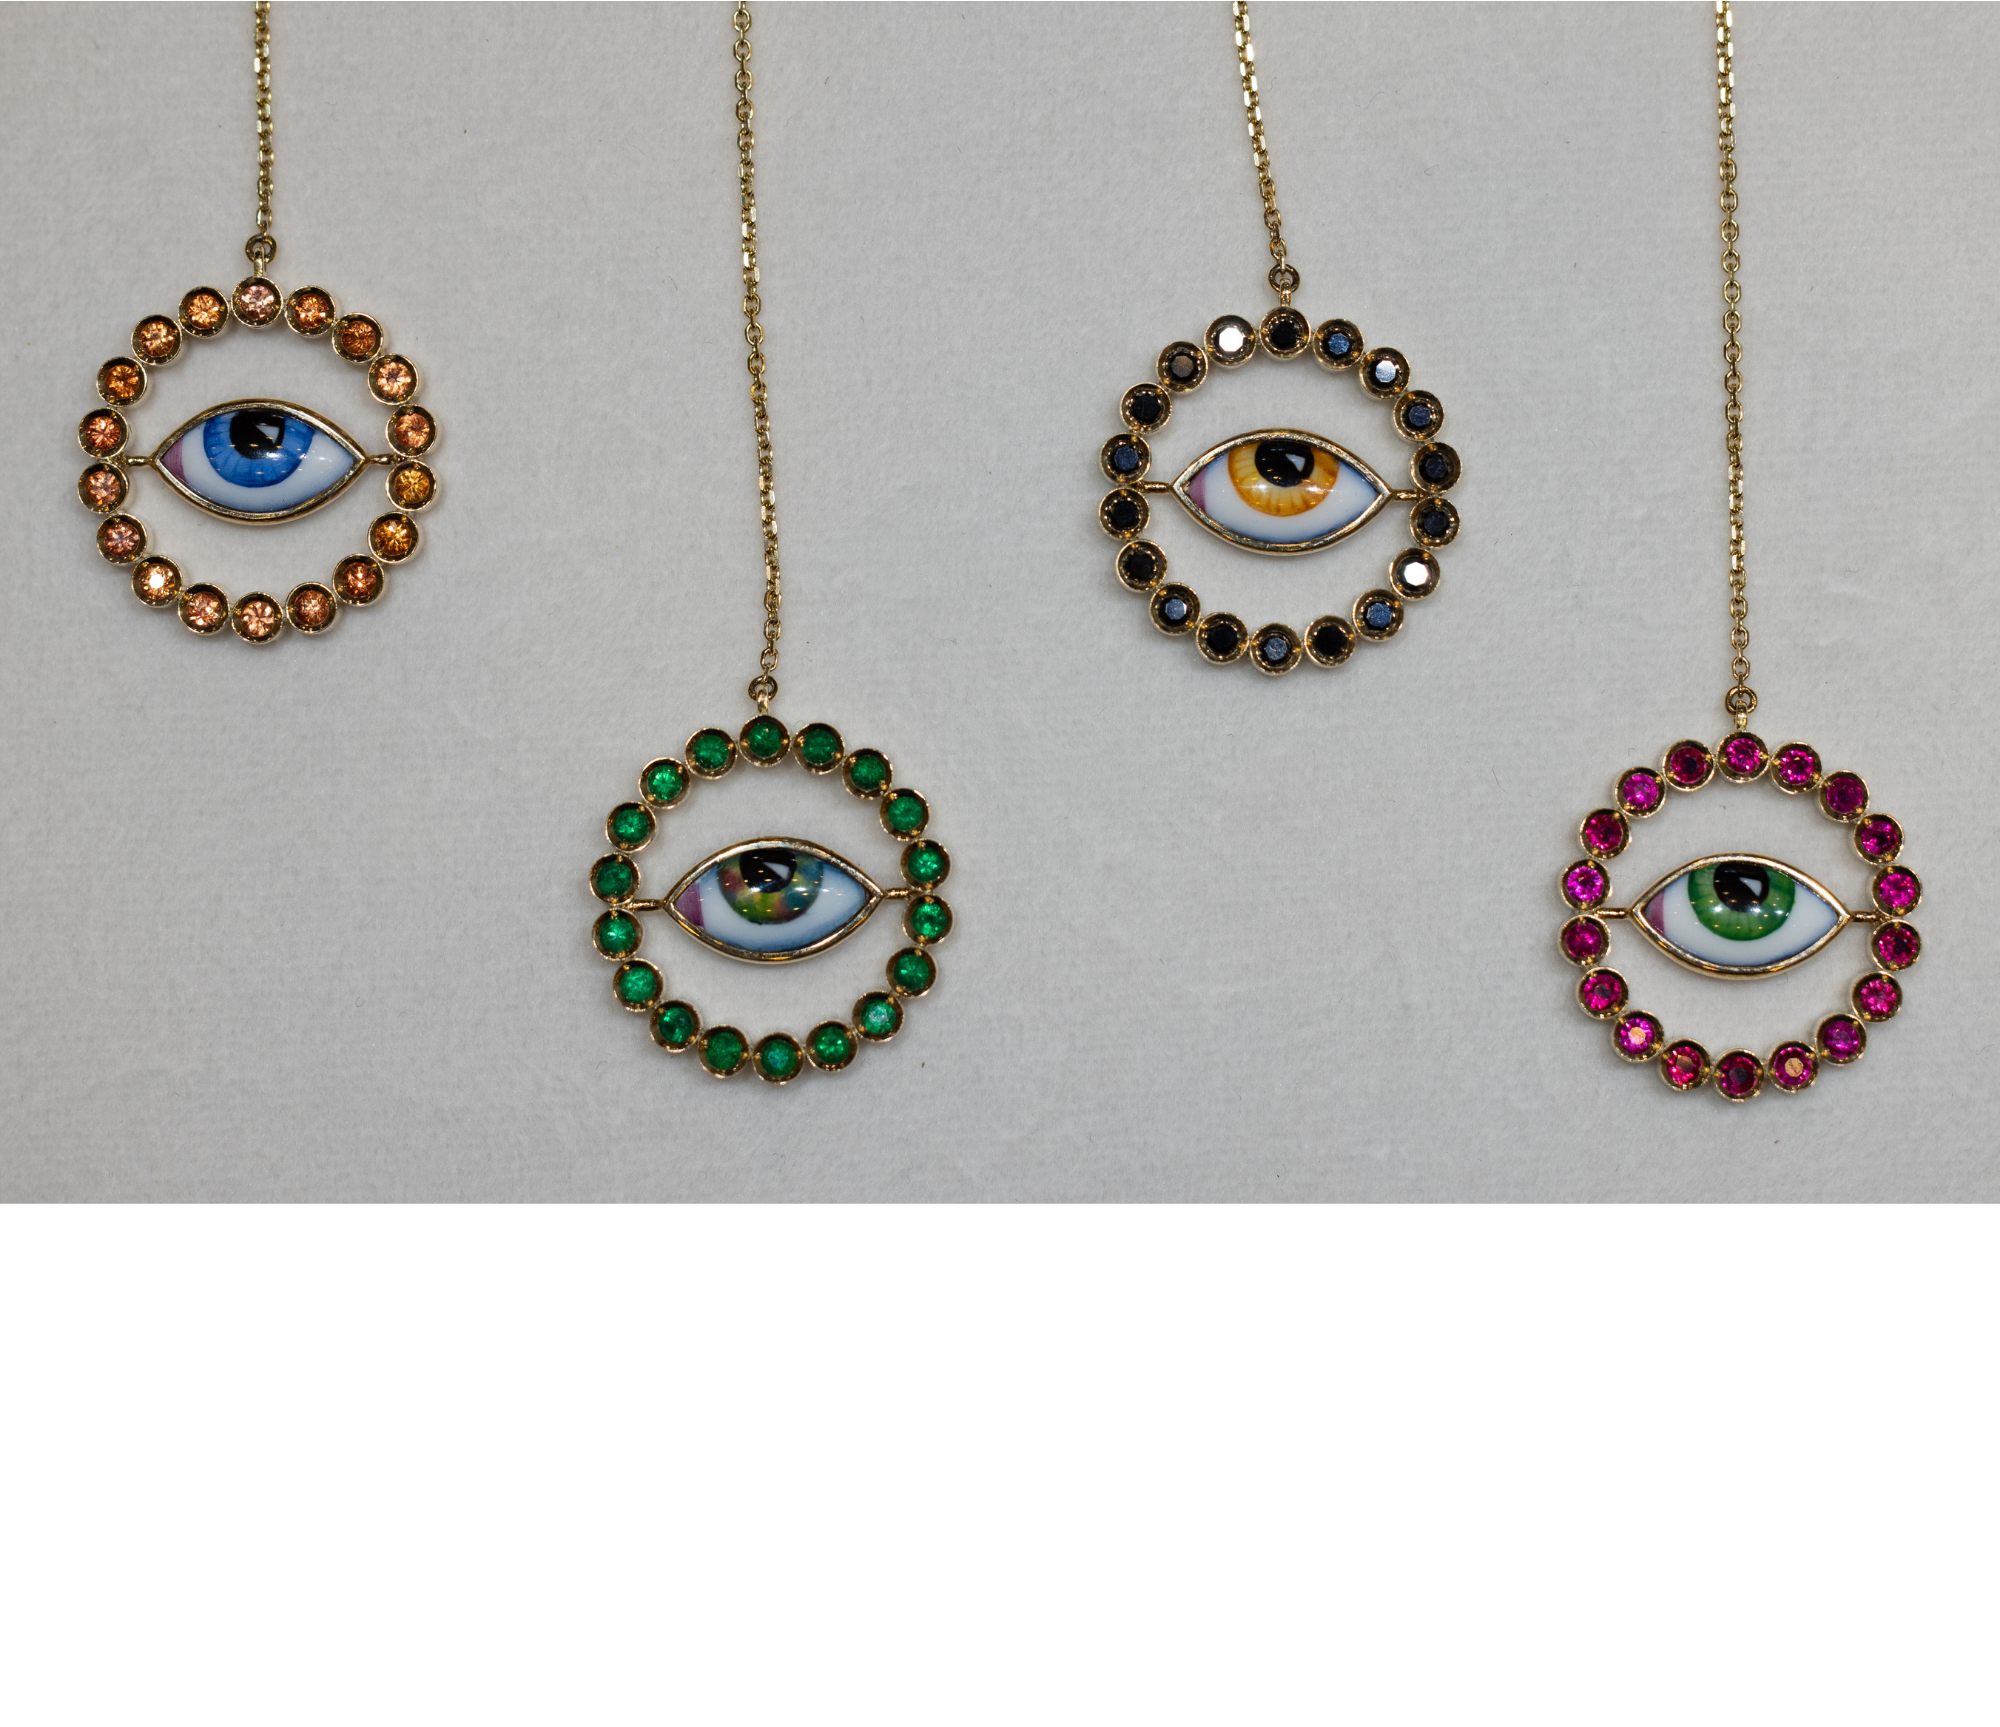 Eye necklace coming soon to Lito 